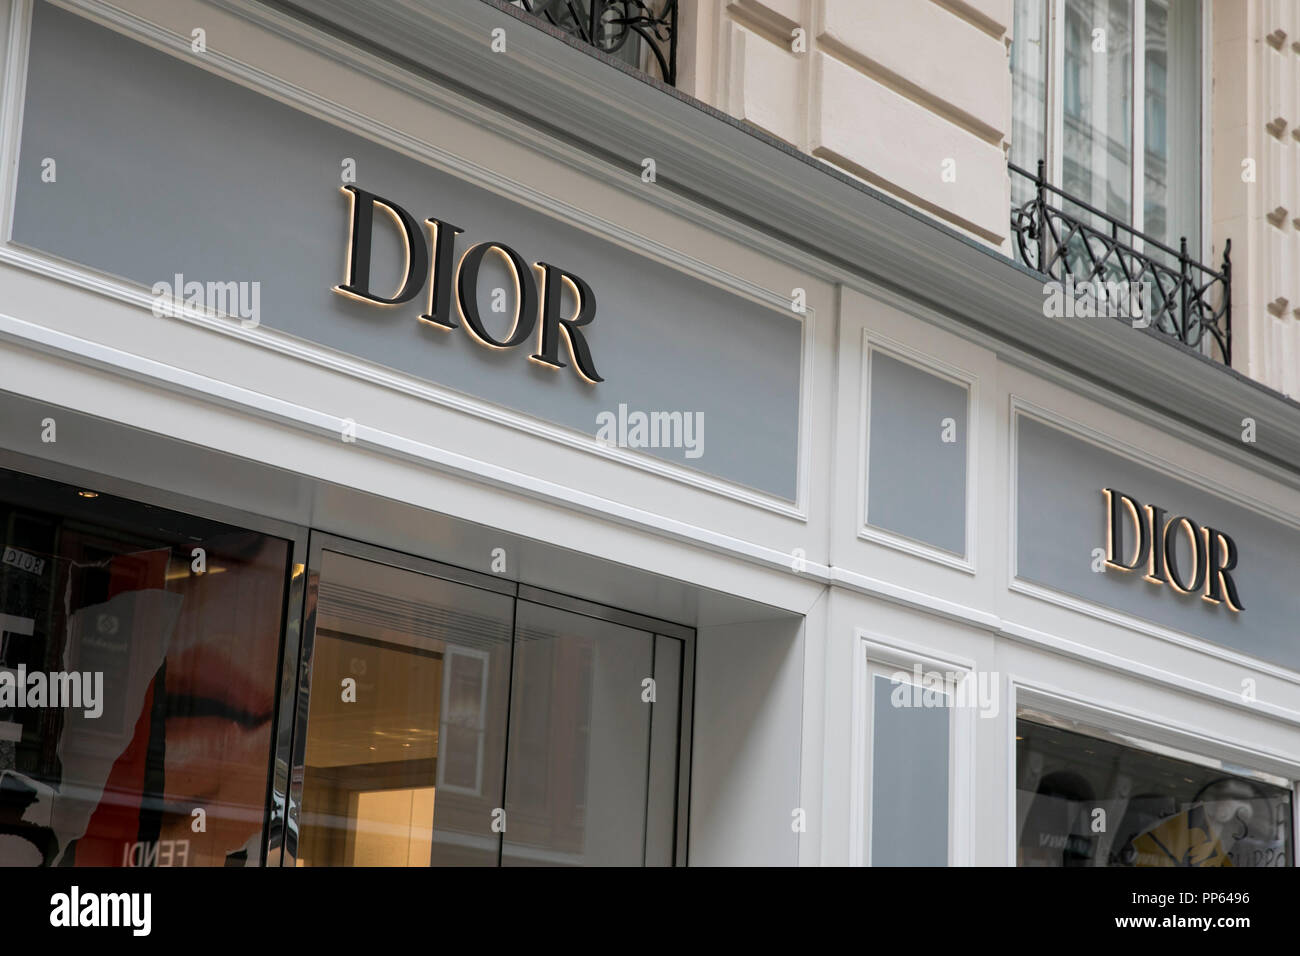 Did you know that Christian Dior opened his first boutique on Avenue  Montaigne and held many of his fashion shows and shoots at the…